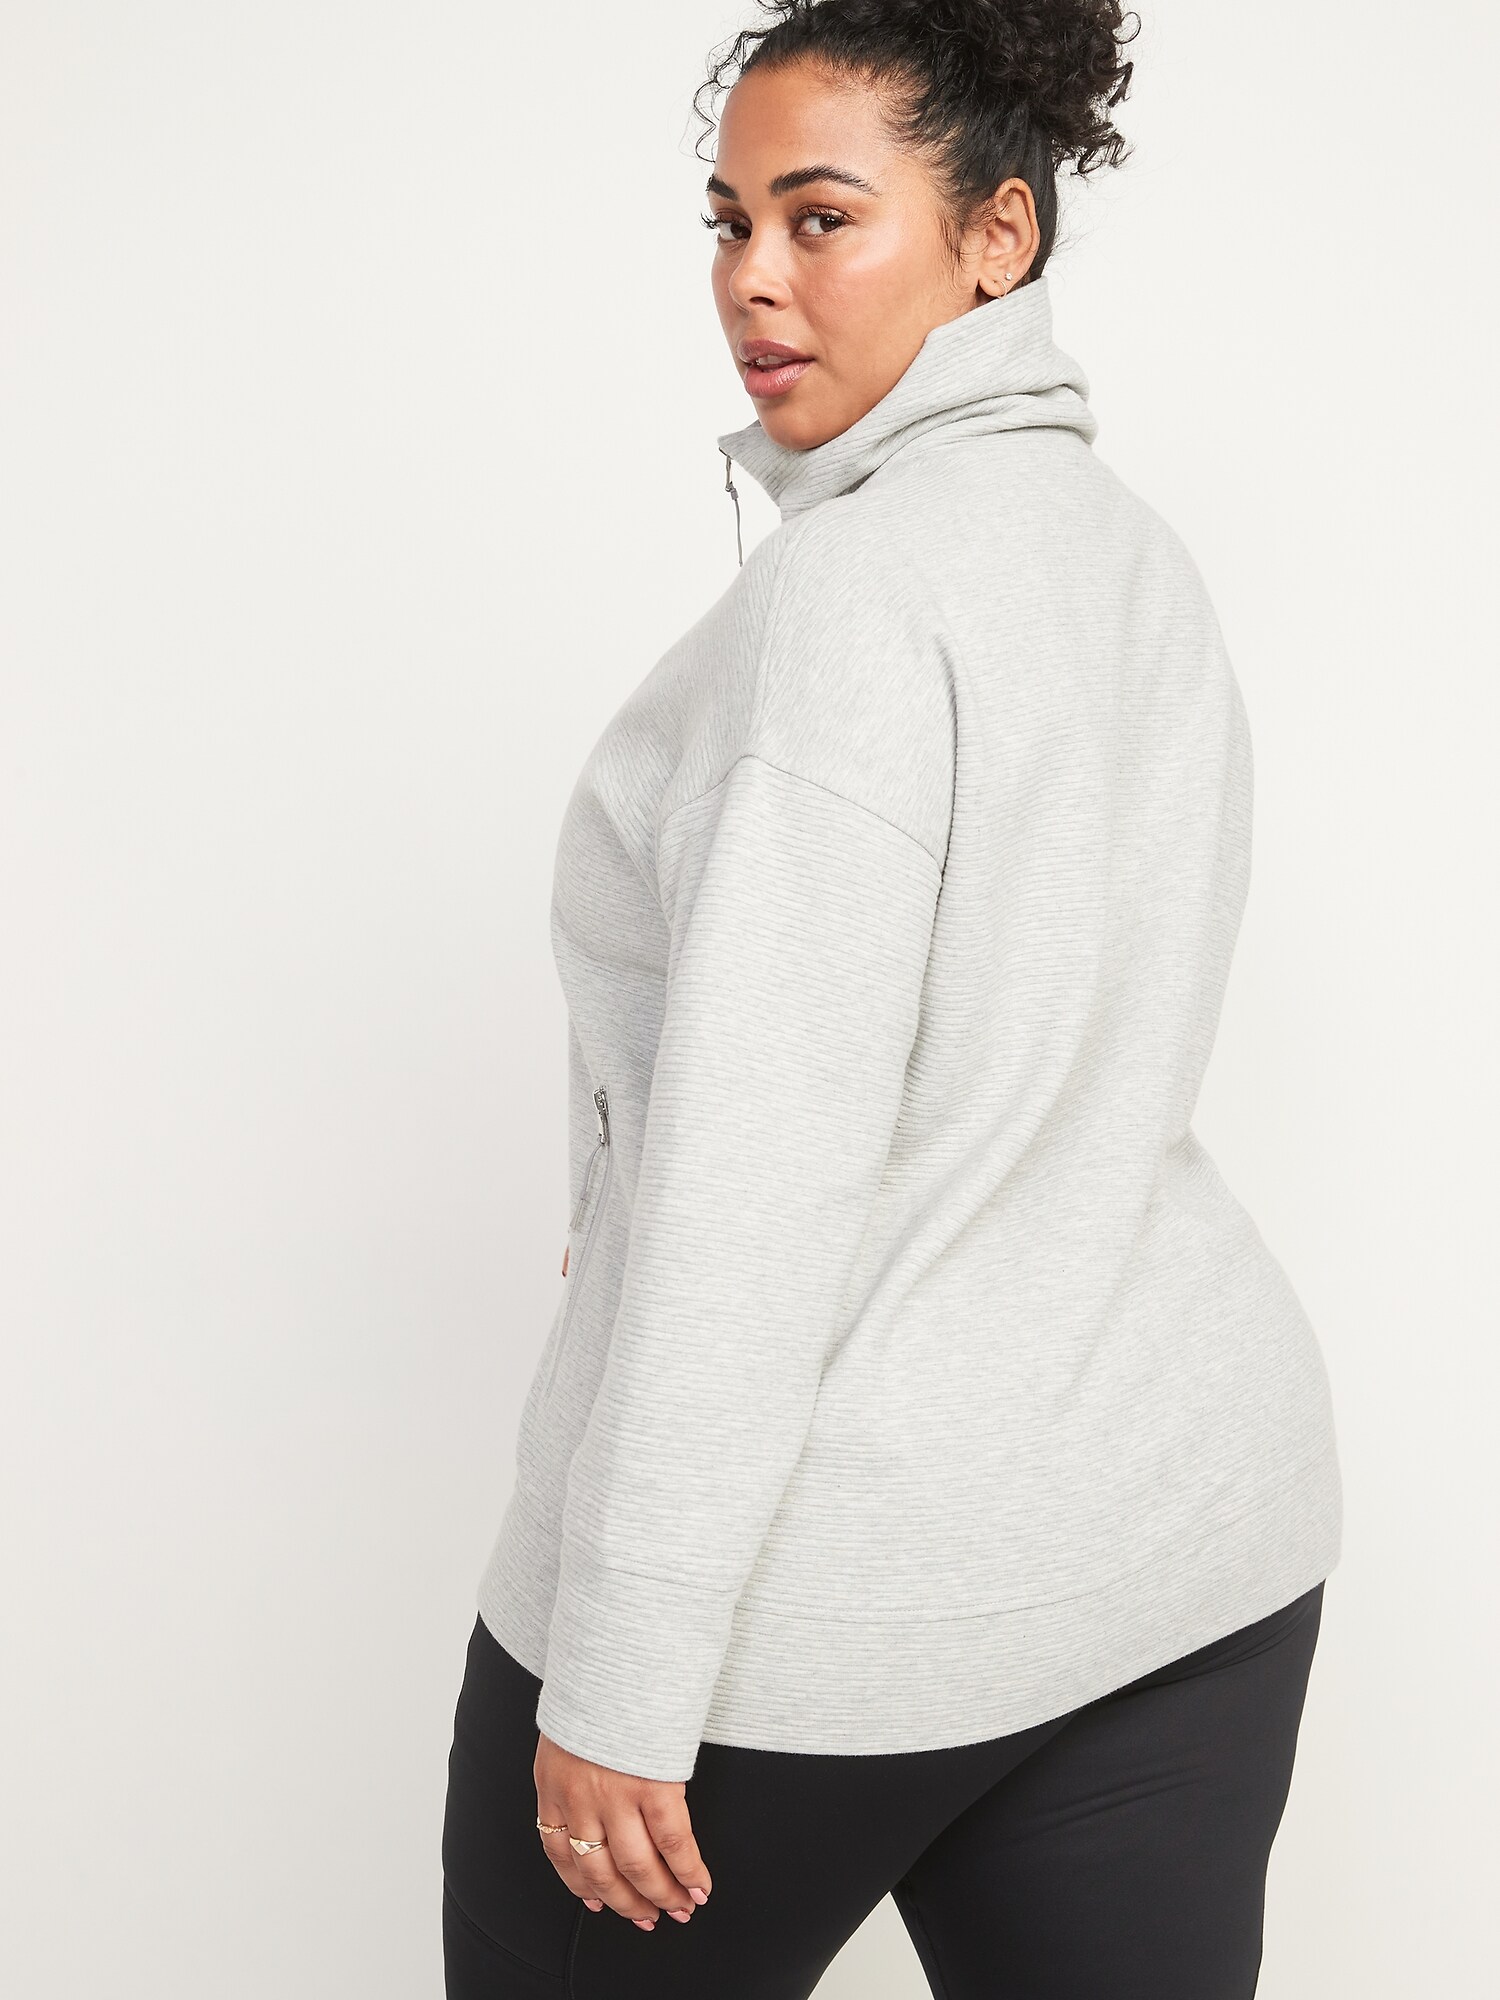 Long-Sleeve Dynamic Fleece Ribbed Performance Jacket for Women | Old Navy